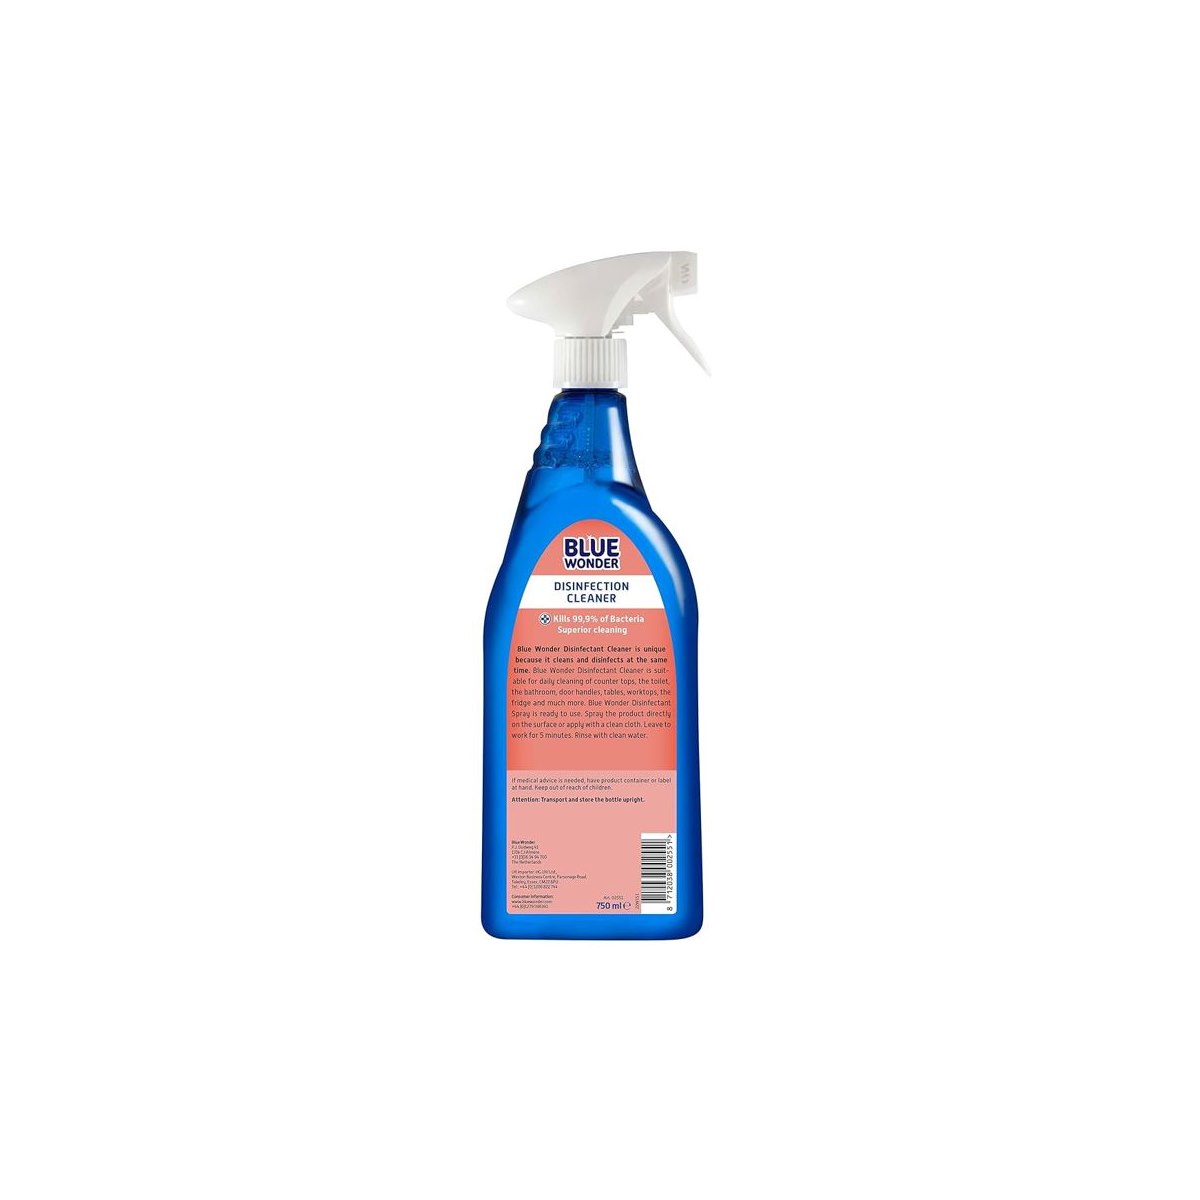 How to Use Blue Wonder Disinfectant Cleaner Kills 99% of Bacteria 750ml